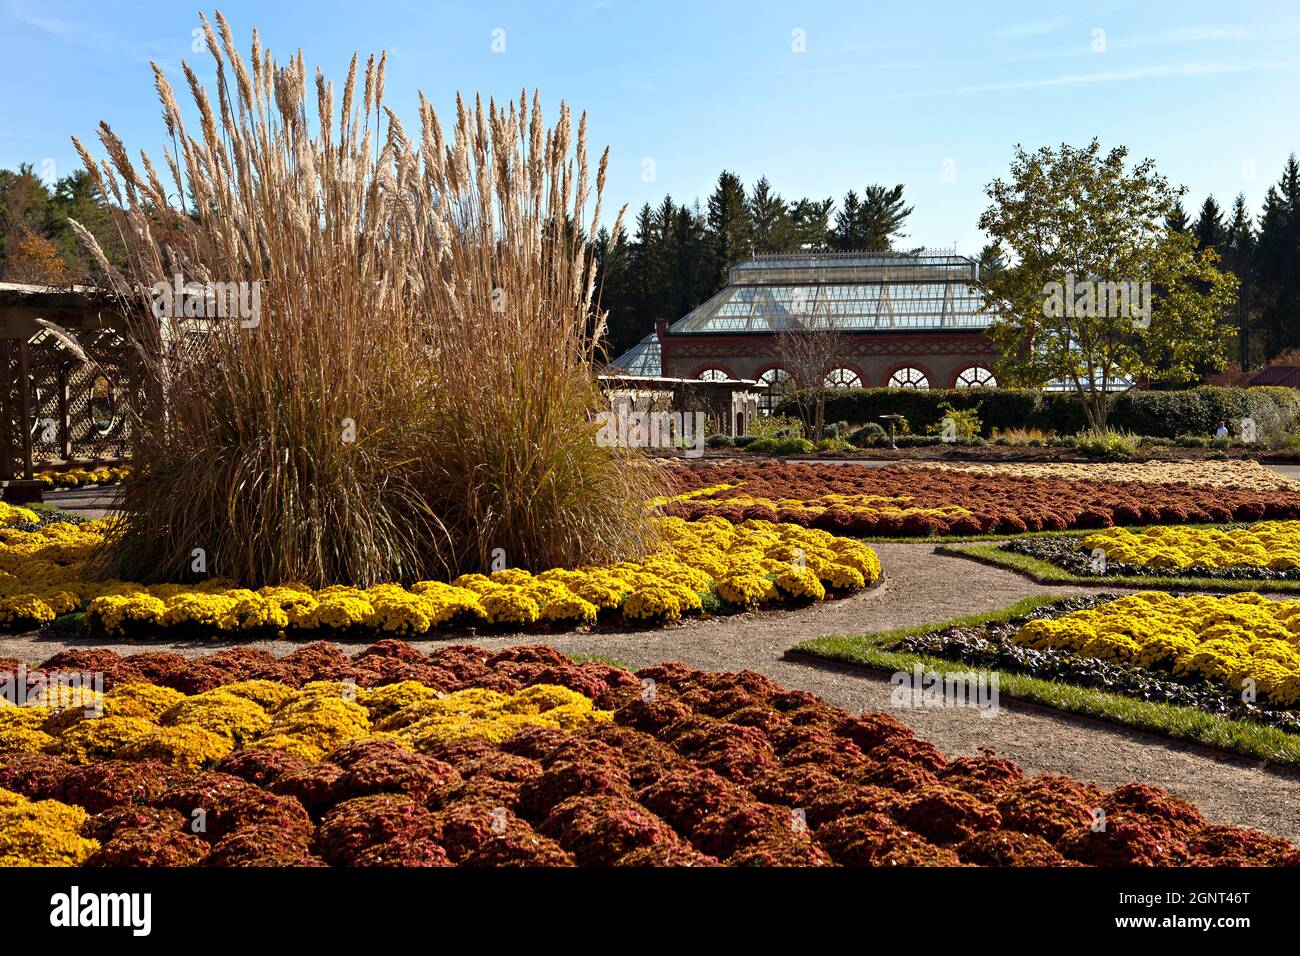 The walled gardens of the Biltmore Estate during autumn in Asheville, North Carolina. The house, privately owned by the Vanderbilt family, is the largest home in America with over 250 rooms. Stock Photo